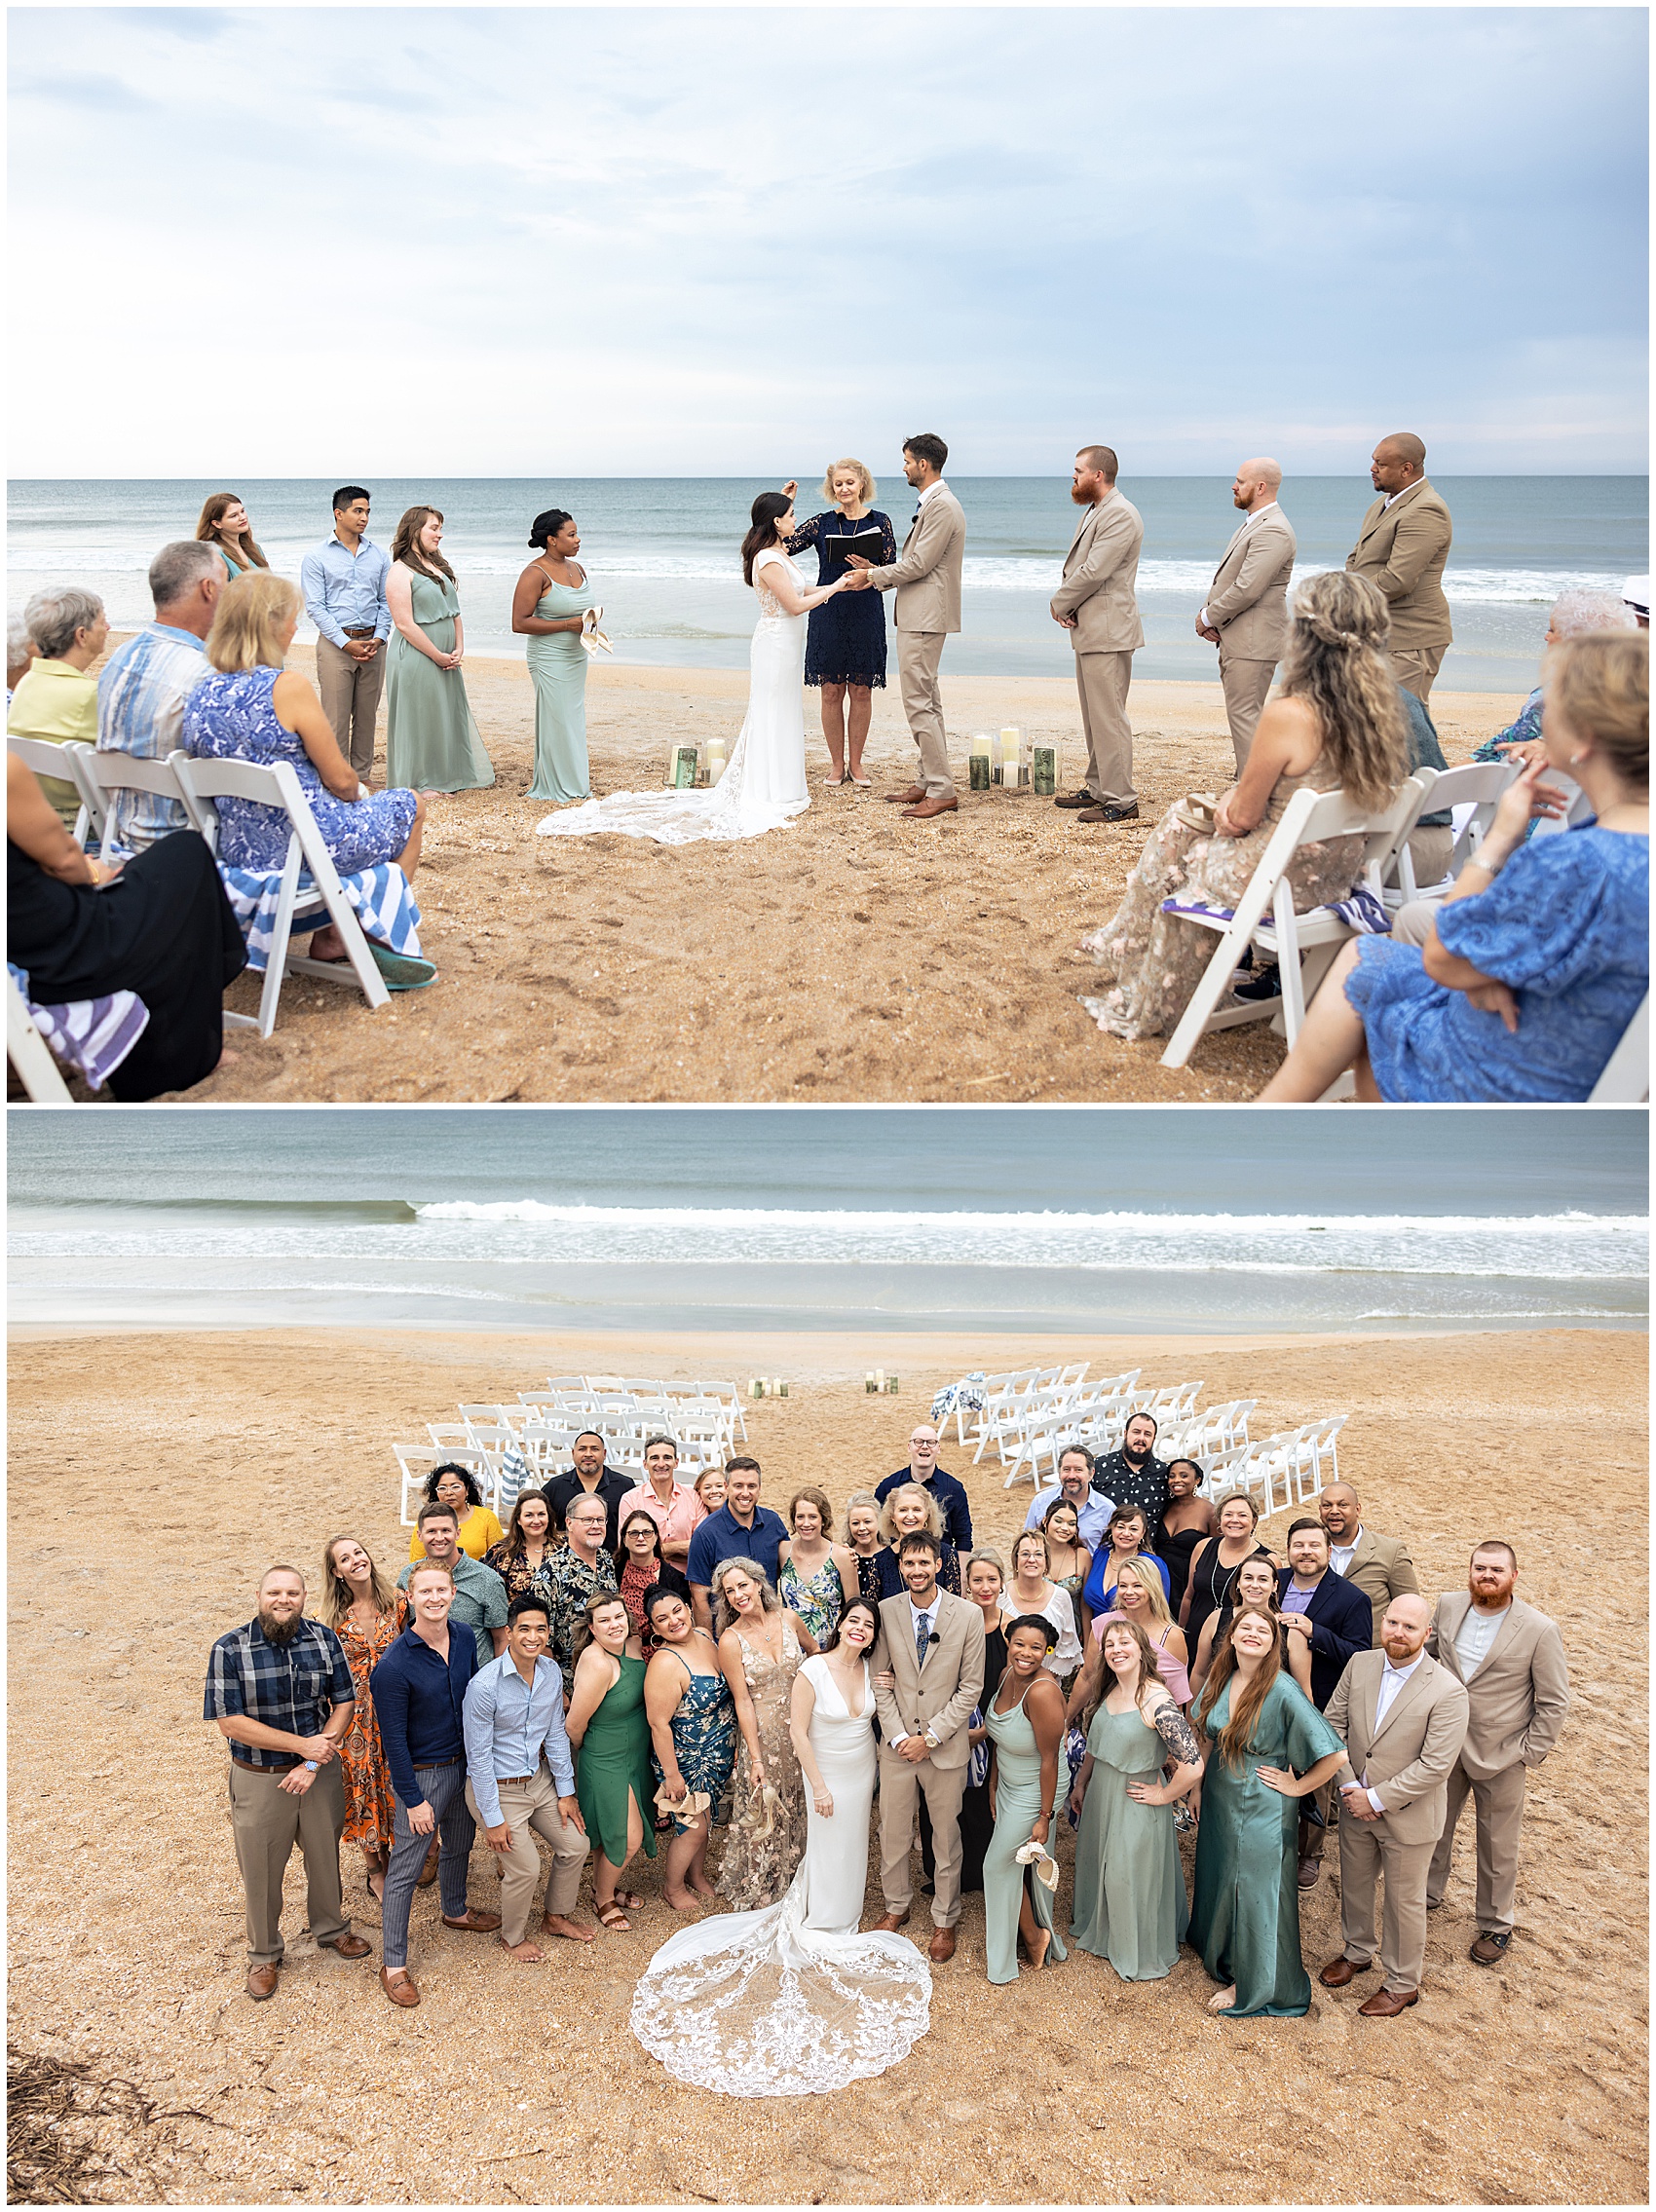 Newlyweds stand with their entire wedding paty and guests at their serenata beach club wedding ceremony